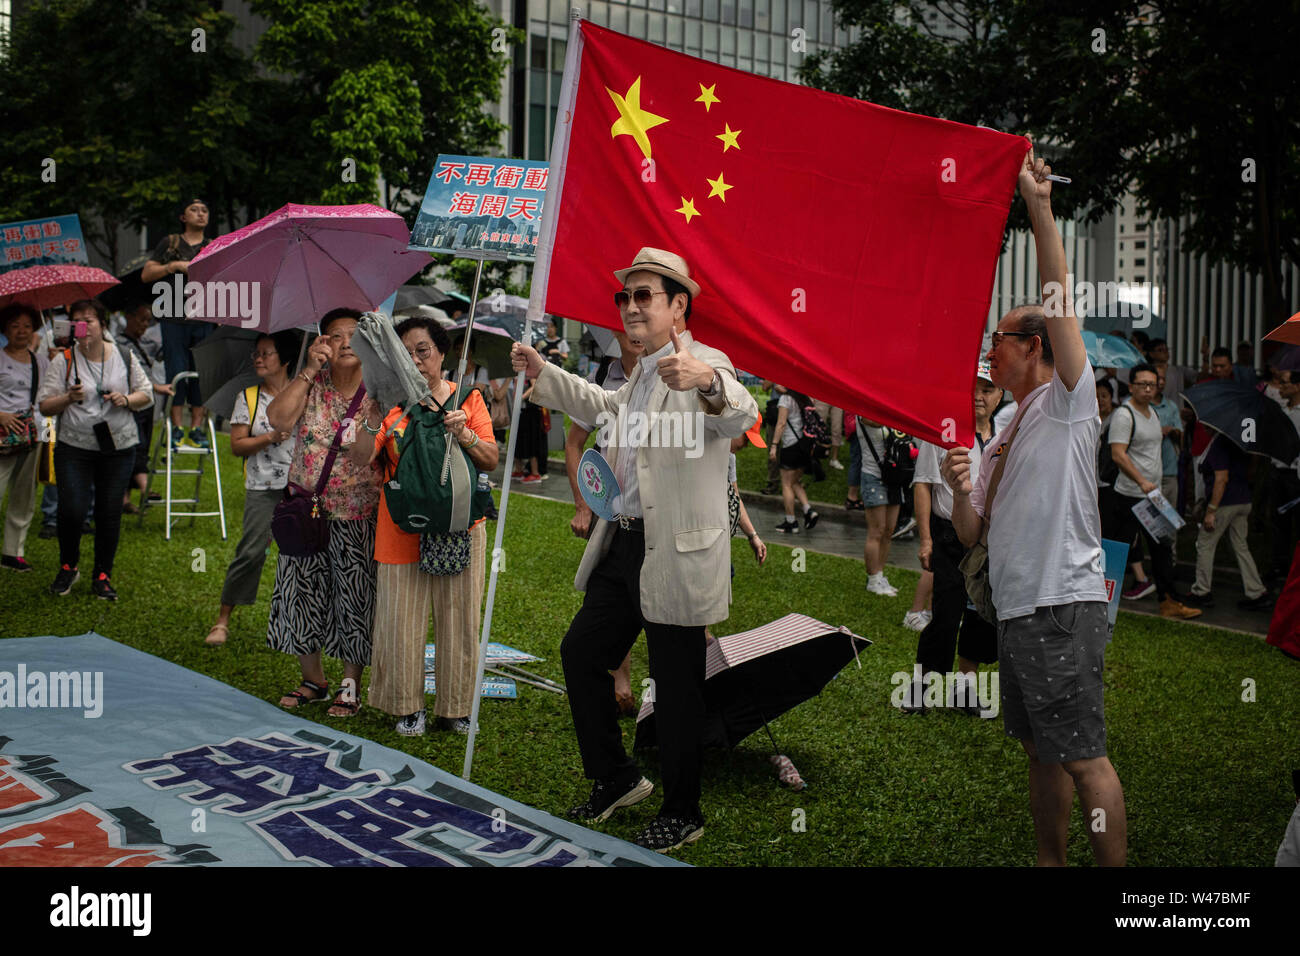 Pro-government supporters posing with a Chinese flag at the Safeguard Hong Kong rally at Tamar Park.Government supporters show up in number of tens of thousands in a pro-police rally, at Tamar Park.  Named Safeguard Hong Kong,  the demonstration was co-organized by 70 pro-Beijing figures and  was attended by local residents, mainland immigrants, members of ethnic minorities, as well as visitors from across the border. Stock Photo